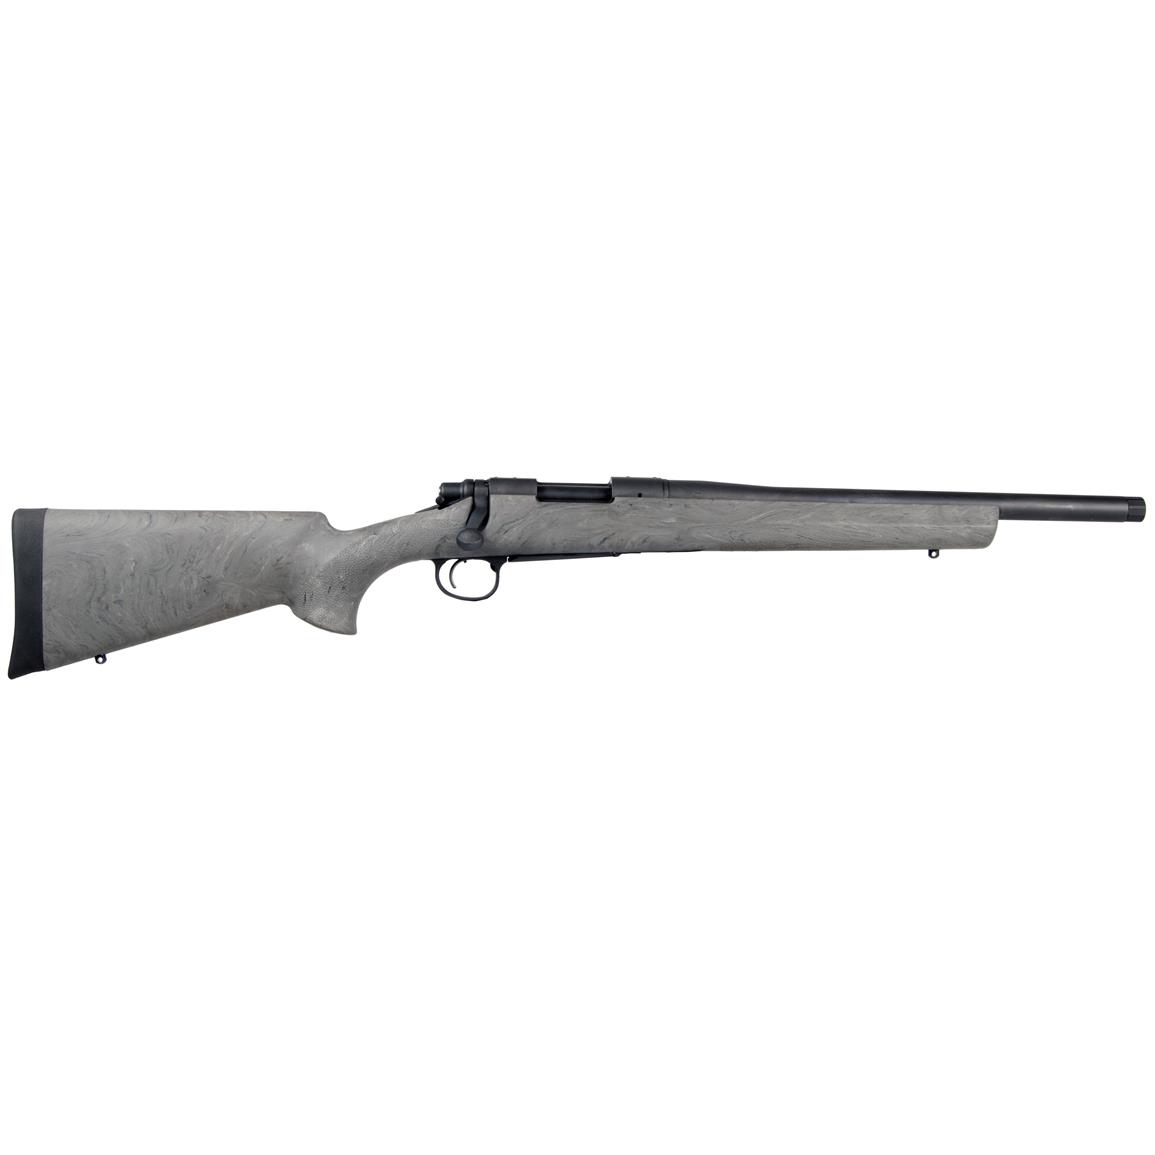 remington bolt action 300 blackout 700 sps tactical 223 barrel aac model rounds rifle rifles sportsmansguide accurately carefully depict listed